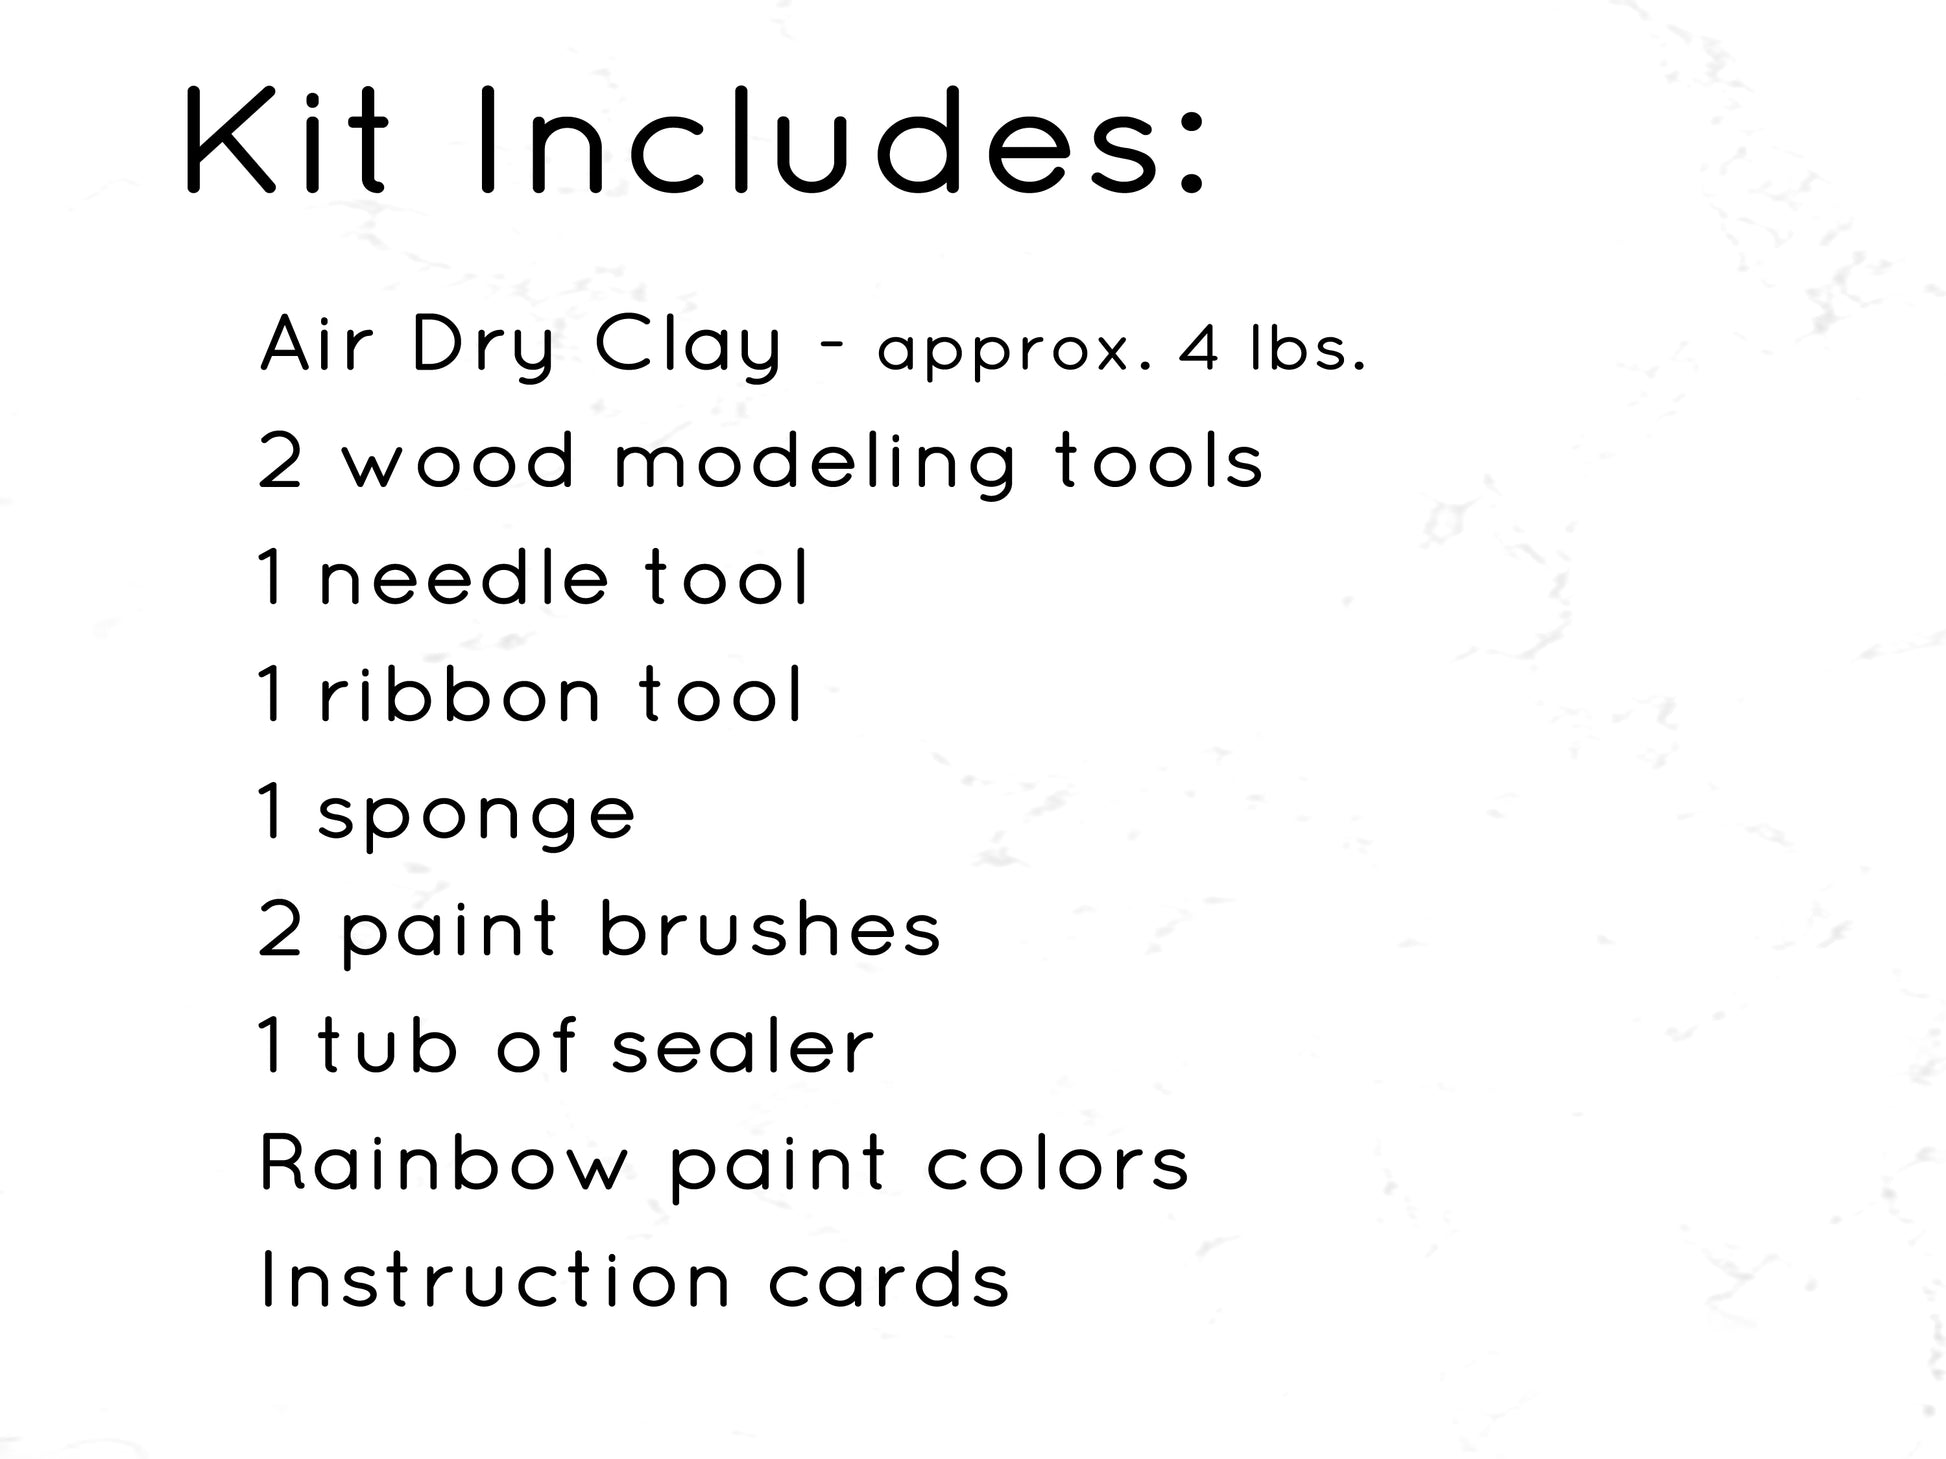 Home pottery kit: Air dry clay kit - Small kit